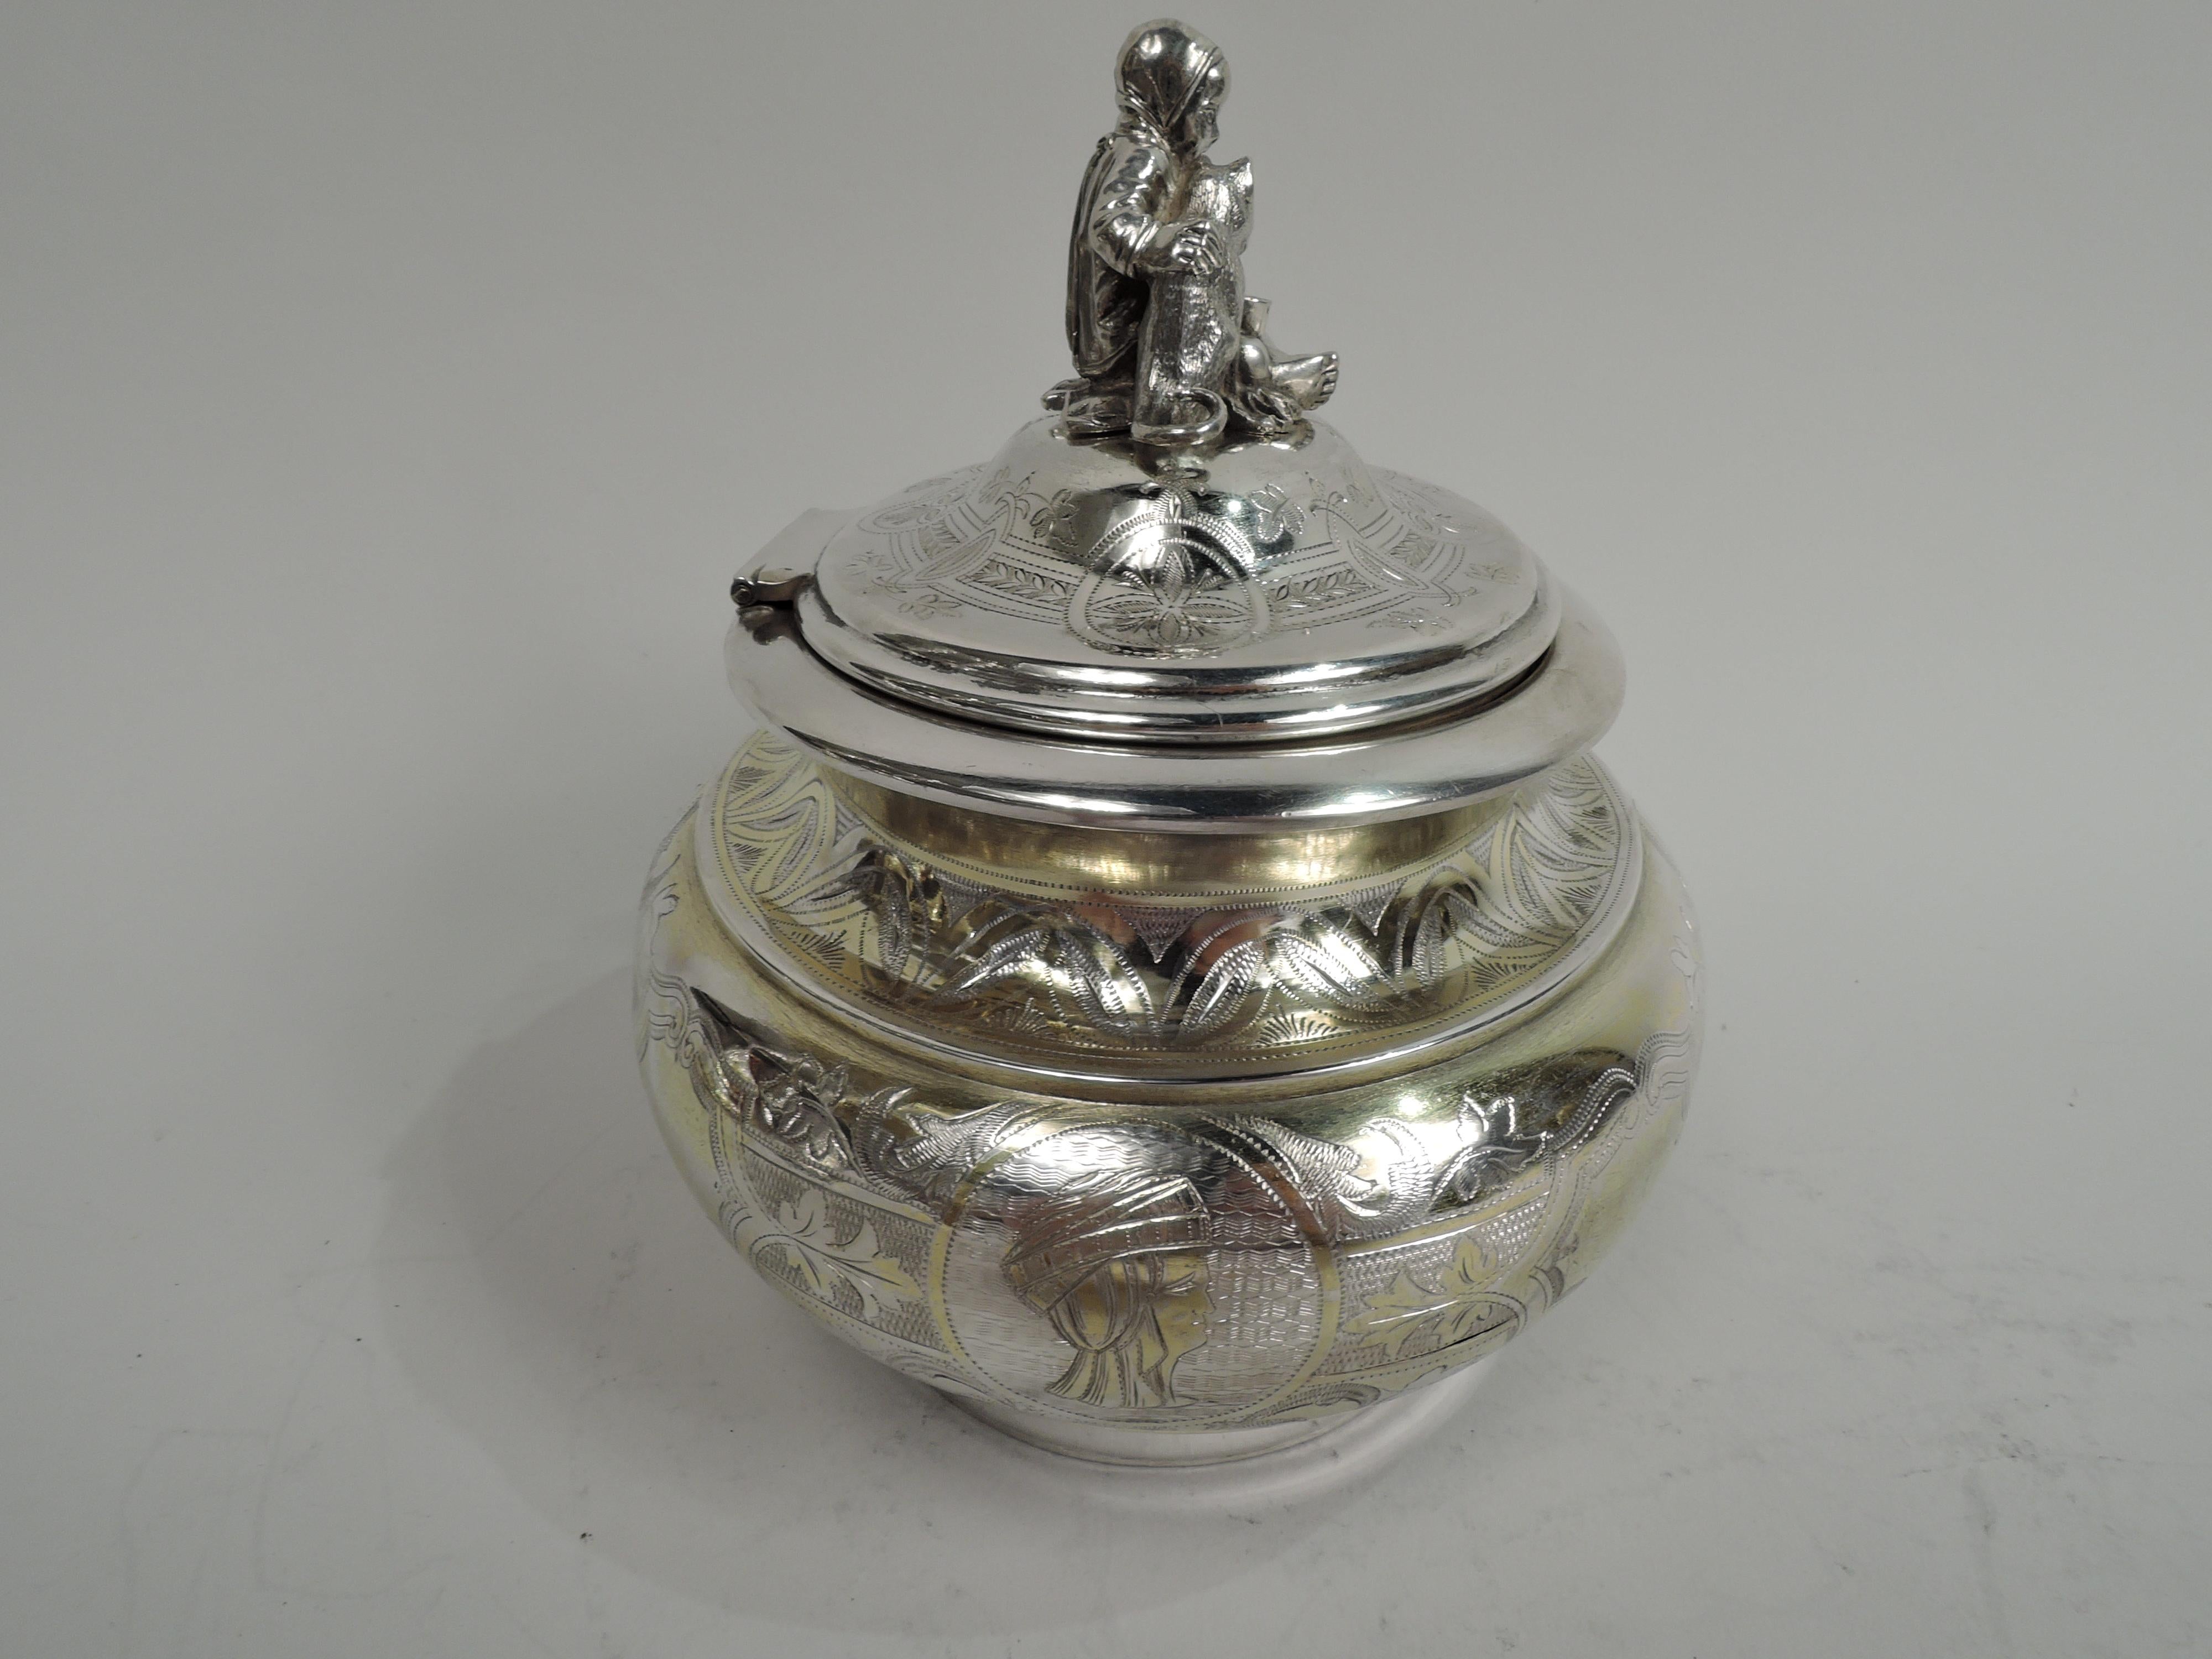 Antique Austrian Classical gilt-washed 800 silver box, ca 1875. Ovoid and bellied on plain inset foot. Cover hinged and domed with cast figural finial: A little girl sits cross-legged and barefoot and rests her hand on the back of a hungry animal